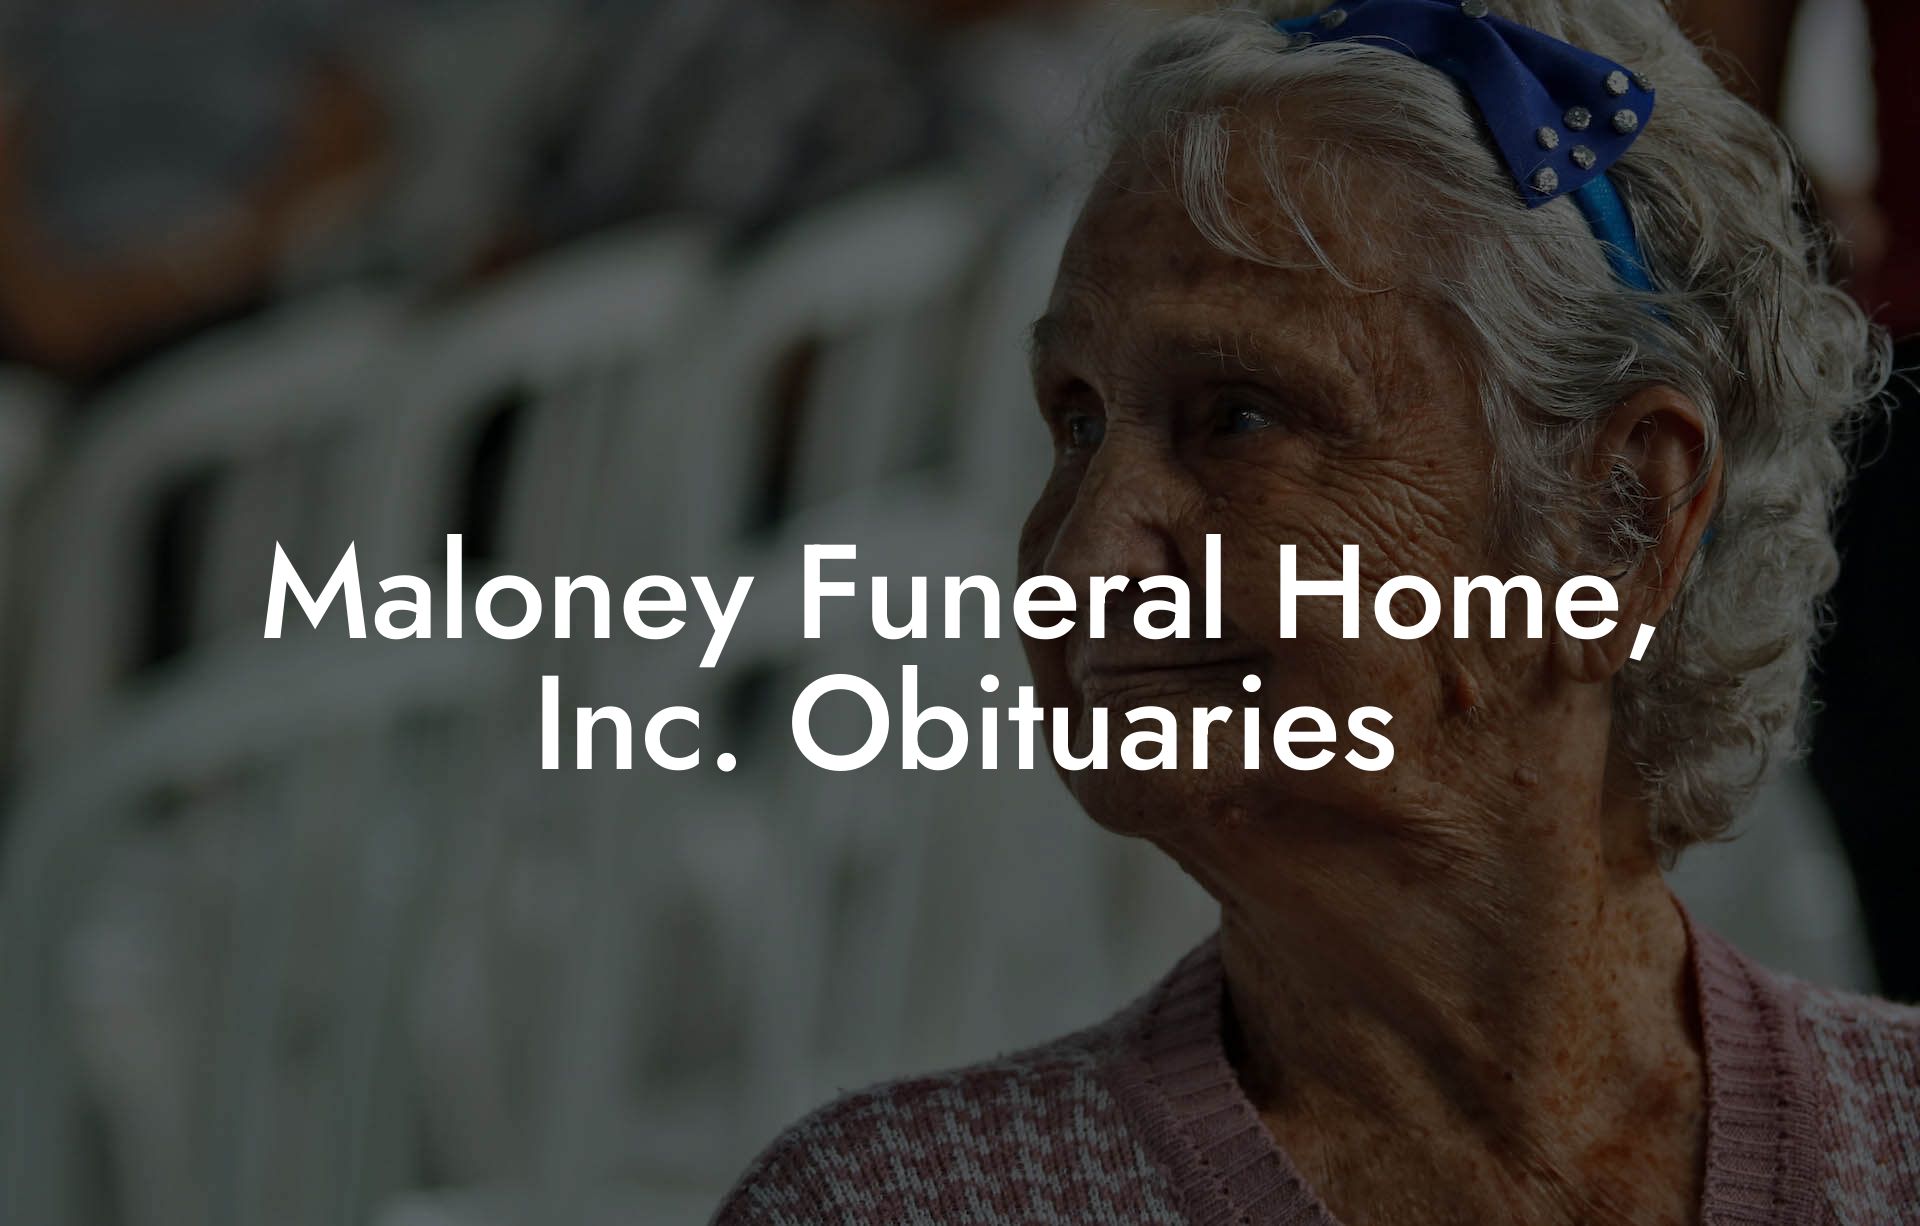 Maloney Funeral Home, Inc. Obituaries